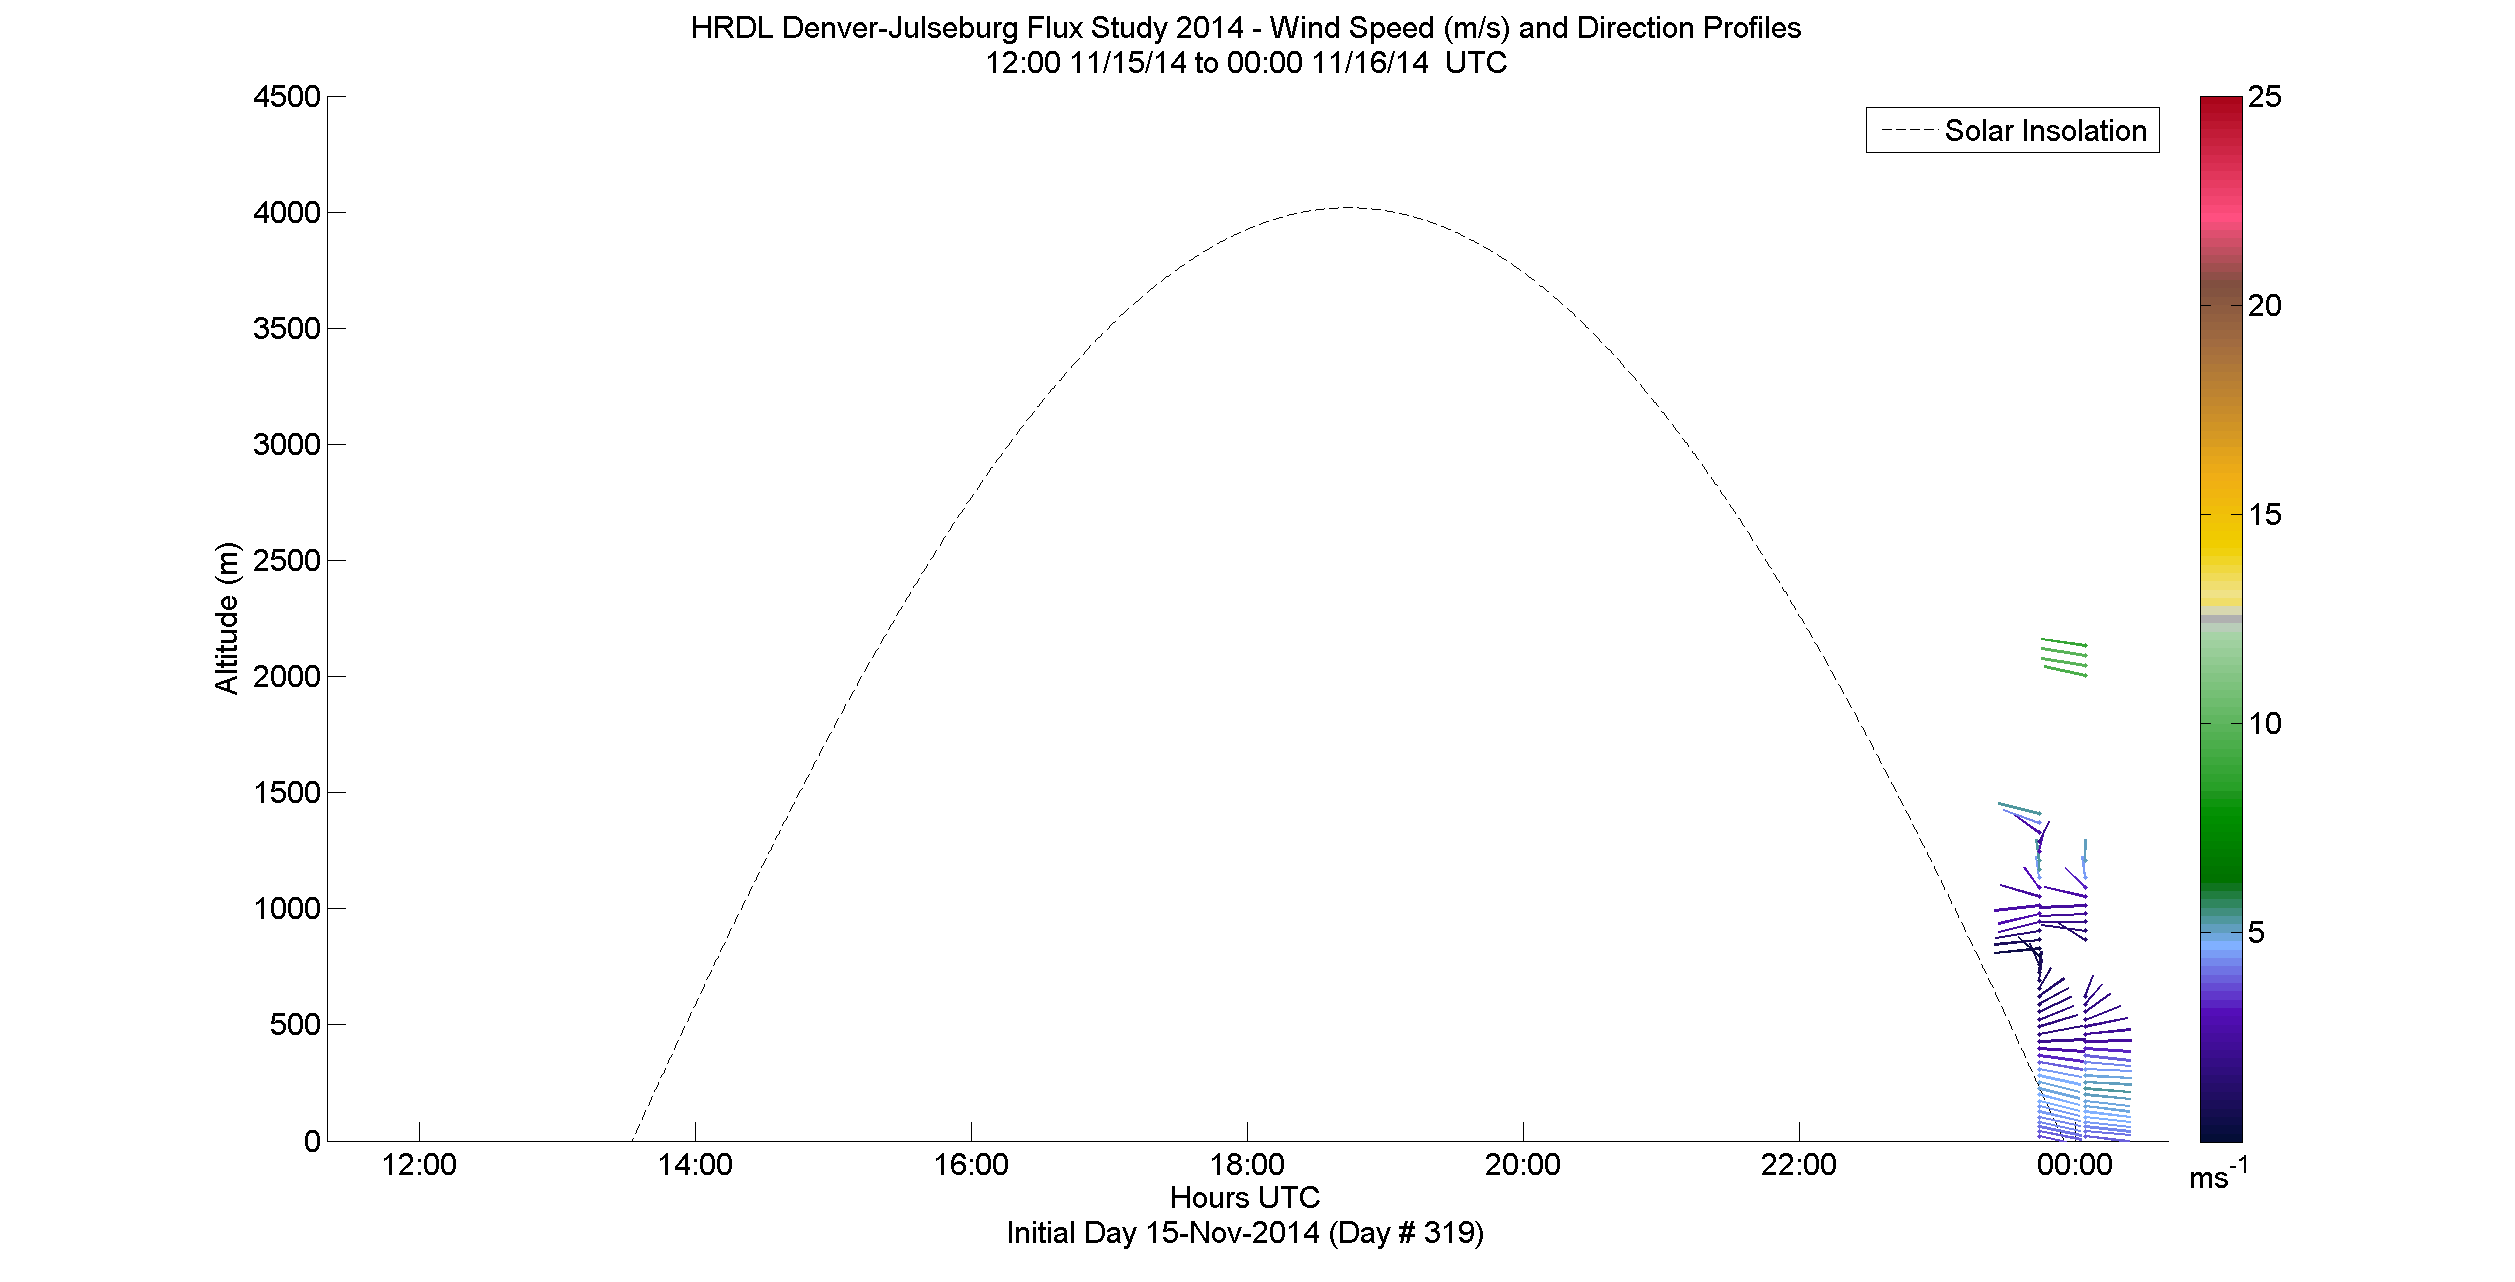 HRDL speed and direction profile - November 15 pm